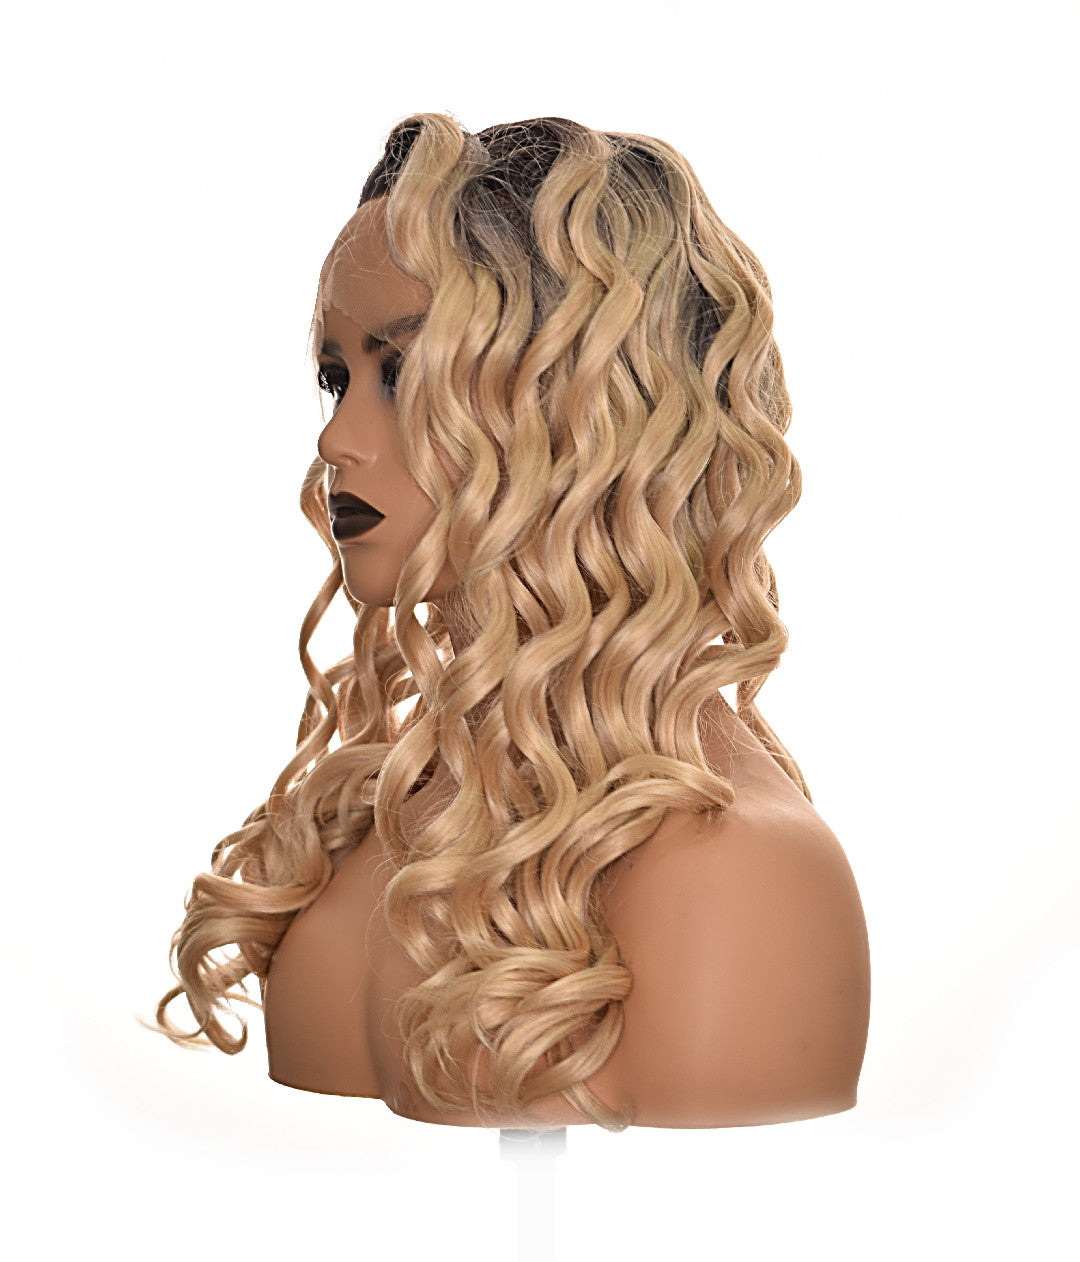 Caramel Ombre Blonde Curls Lace Front Wig. Larissa Wig.